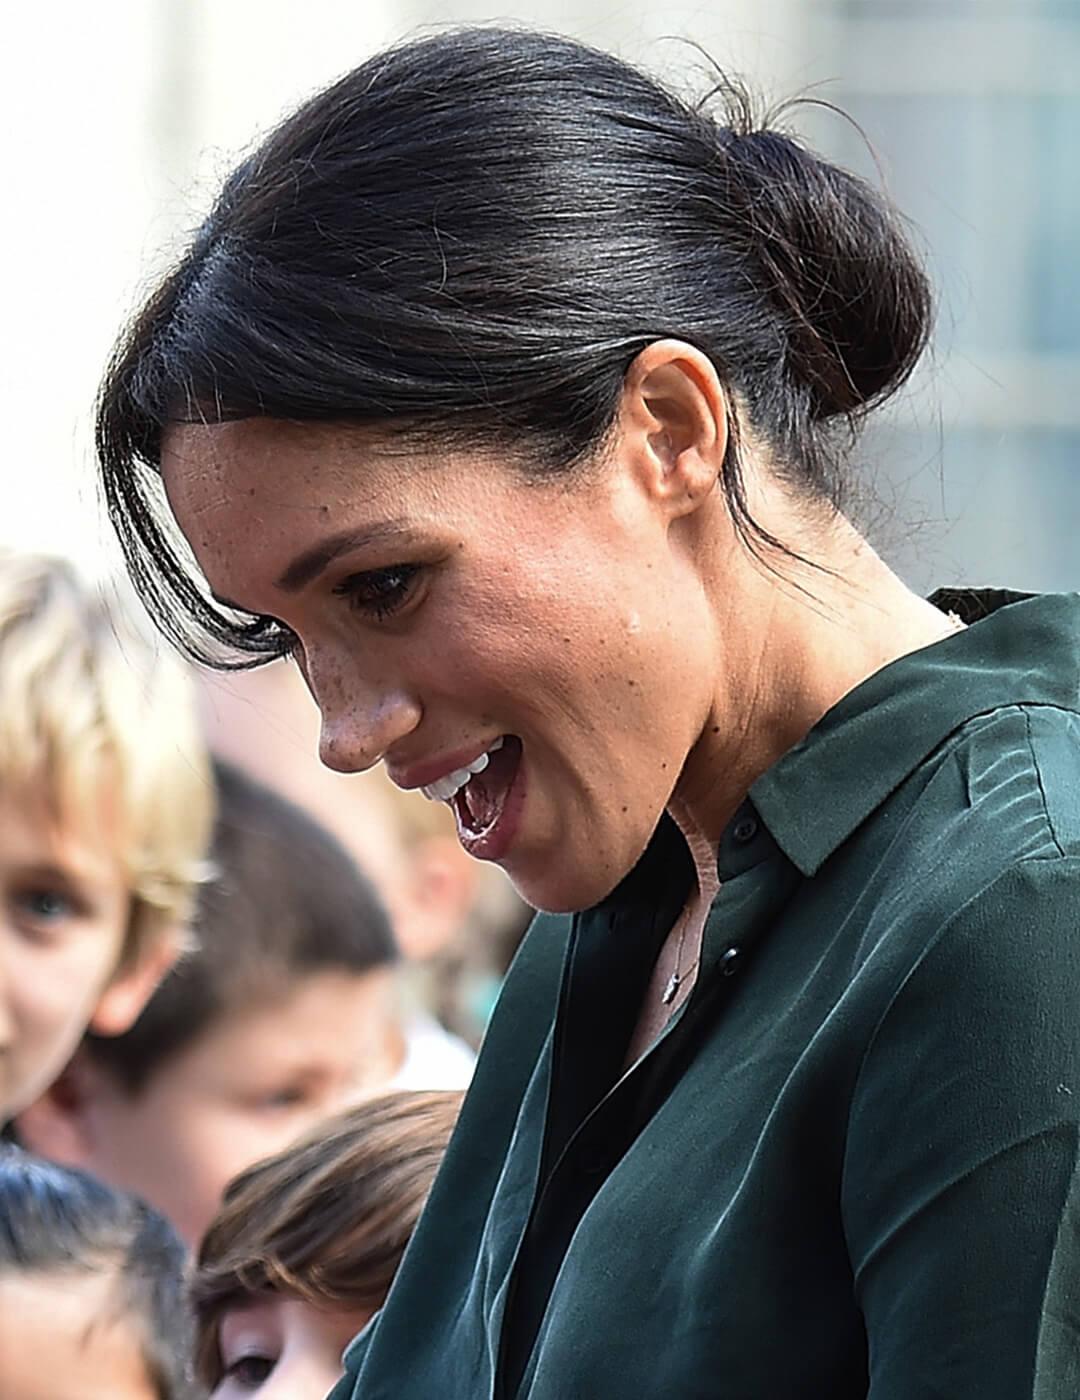 Meghan Markle, Duchess of Sussex, greeting children and sporting a messy chignon hairstyle